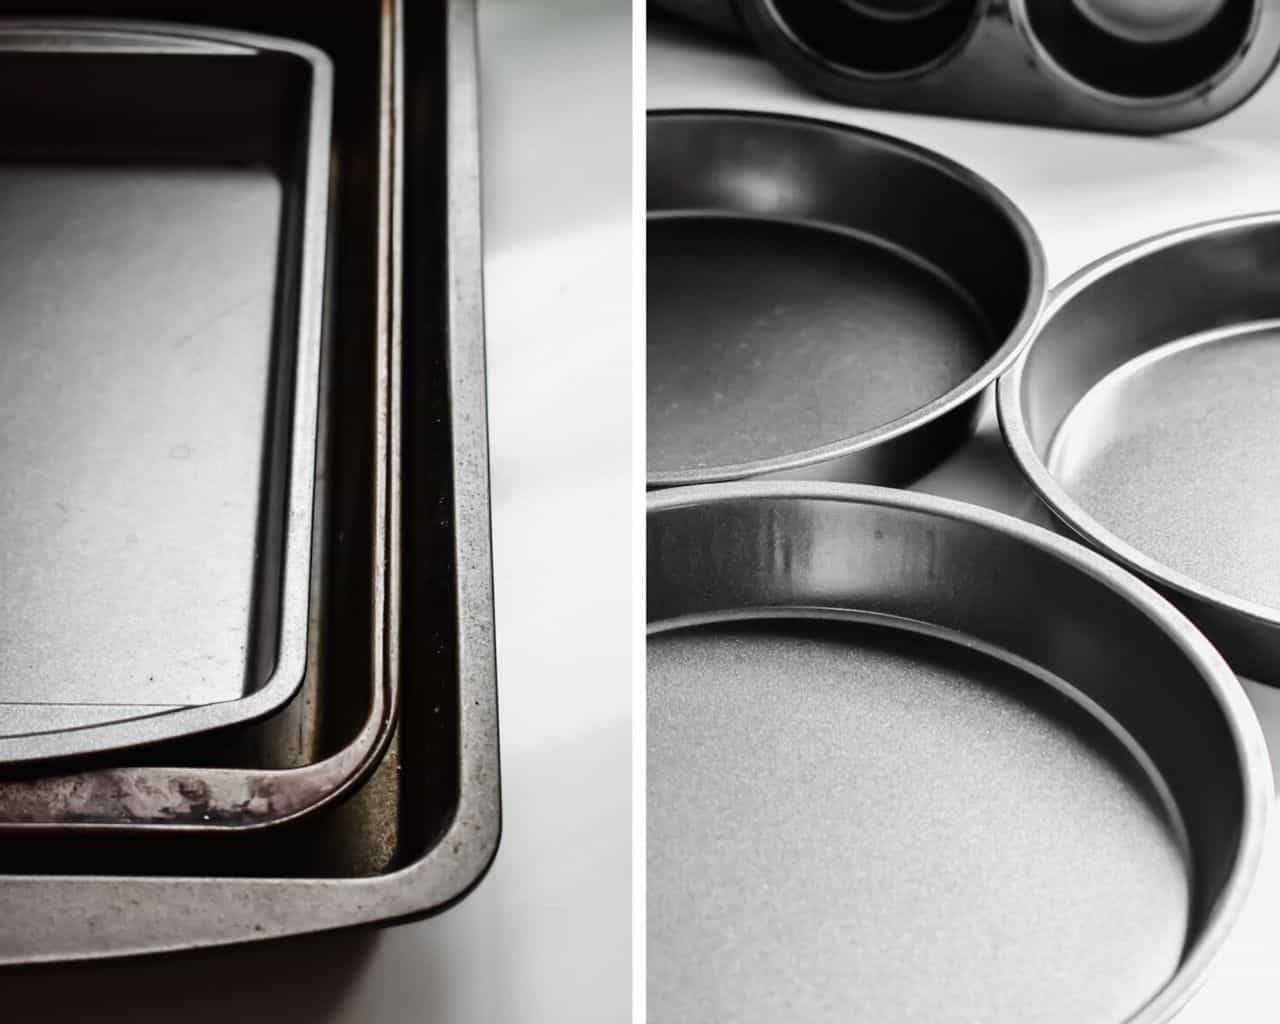 Side by side photos of rectangular and round baking pans